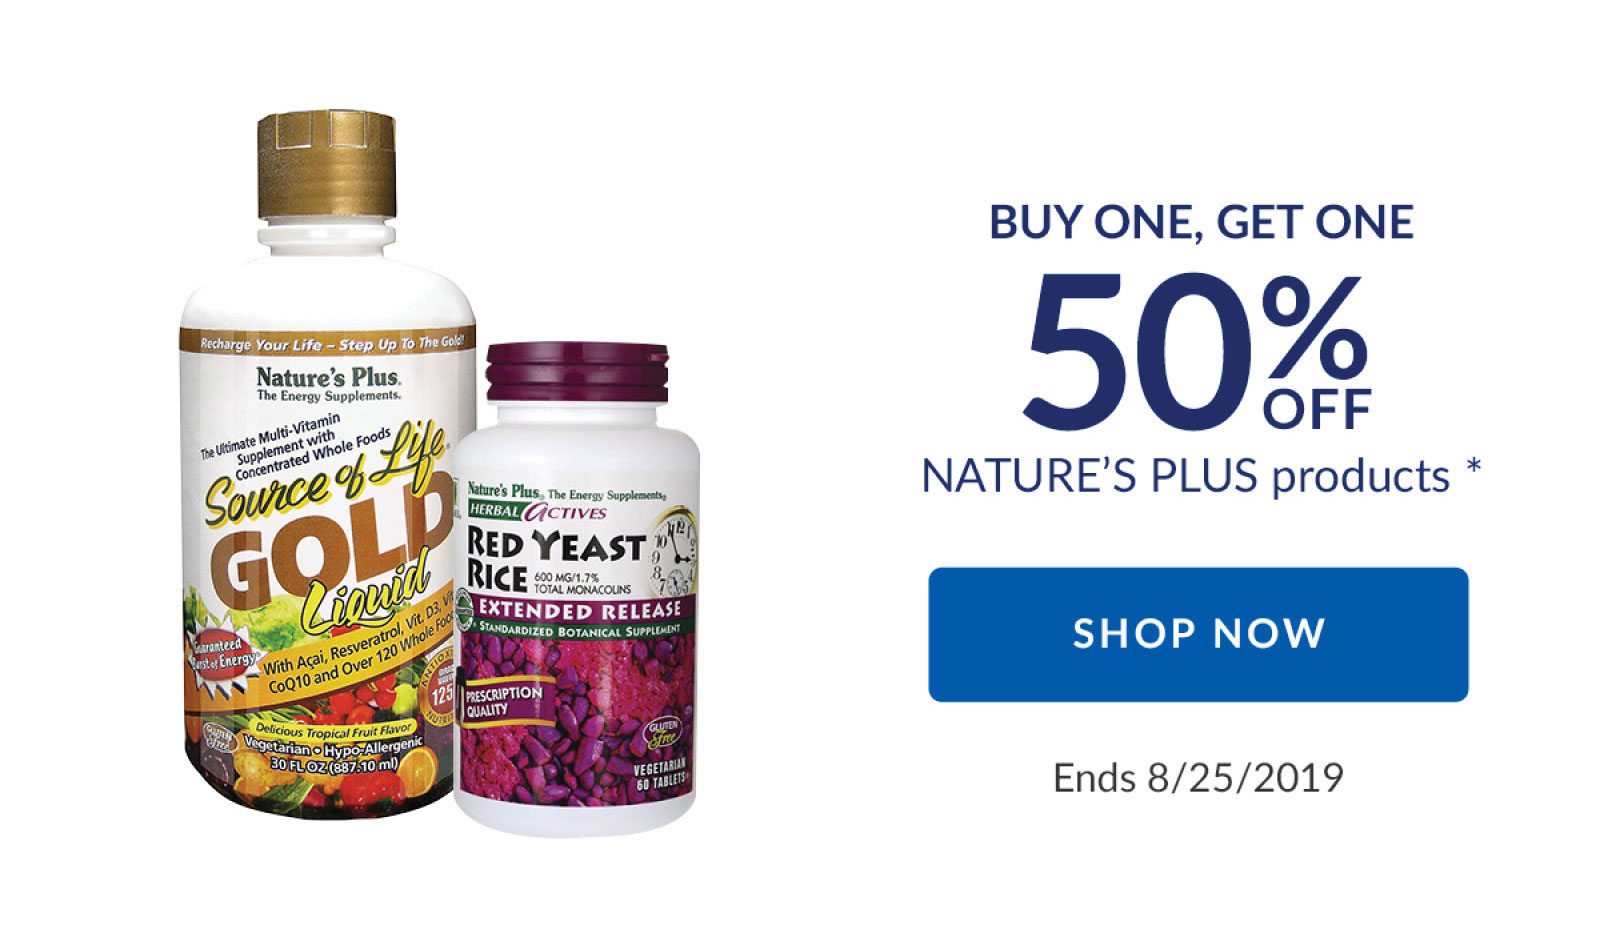 BUY ONE, GET ONE 50% OFF | NATURE'S PLUS products * | SHOP NOW | Ends 8/25/2019